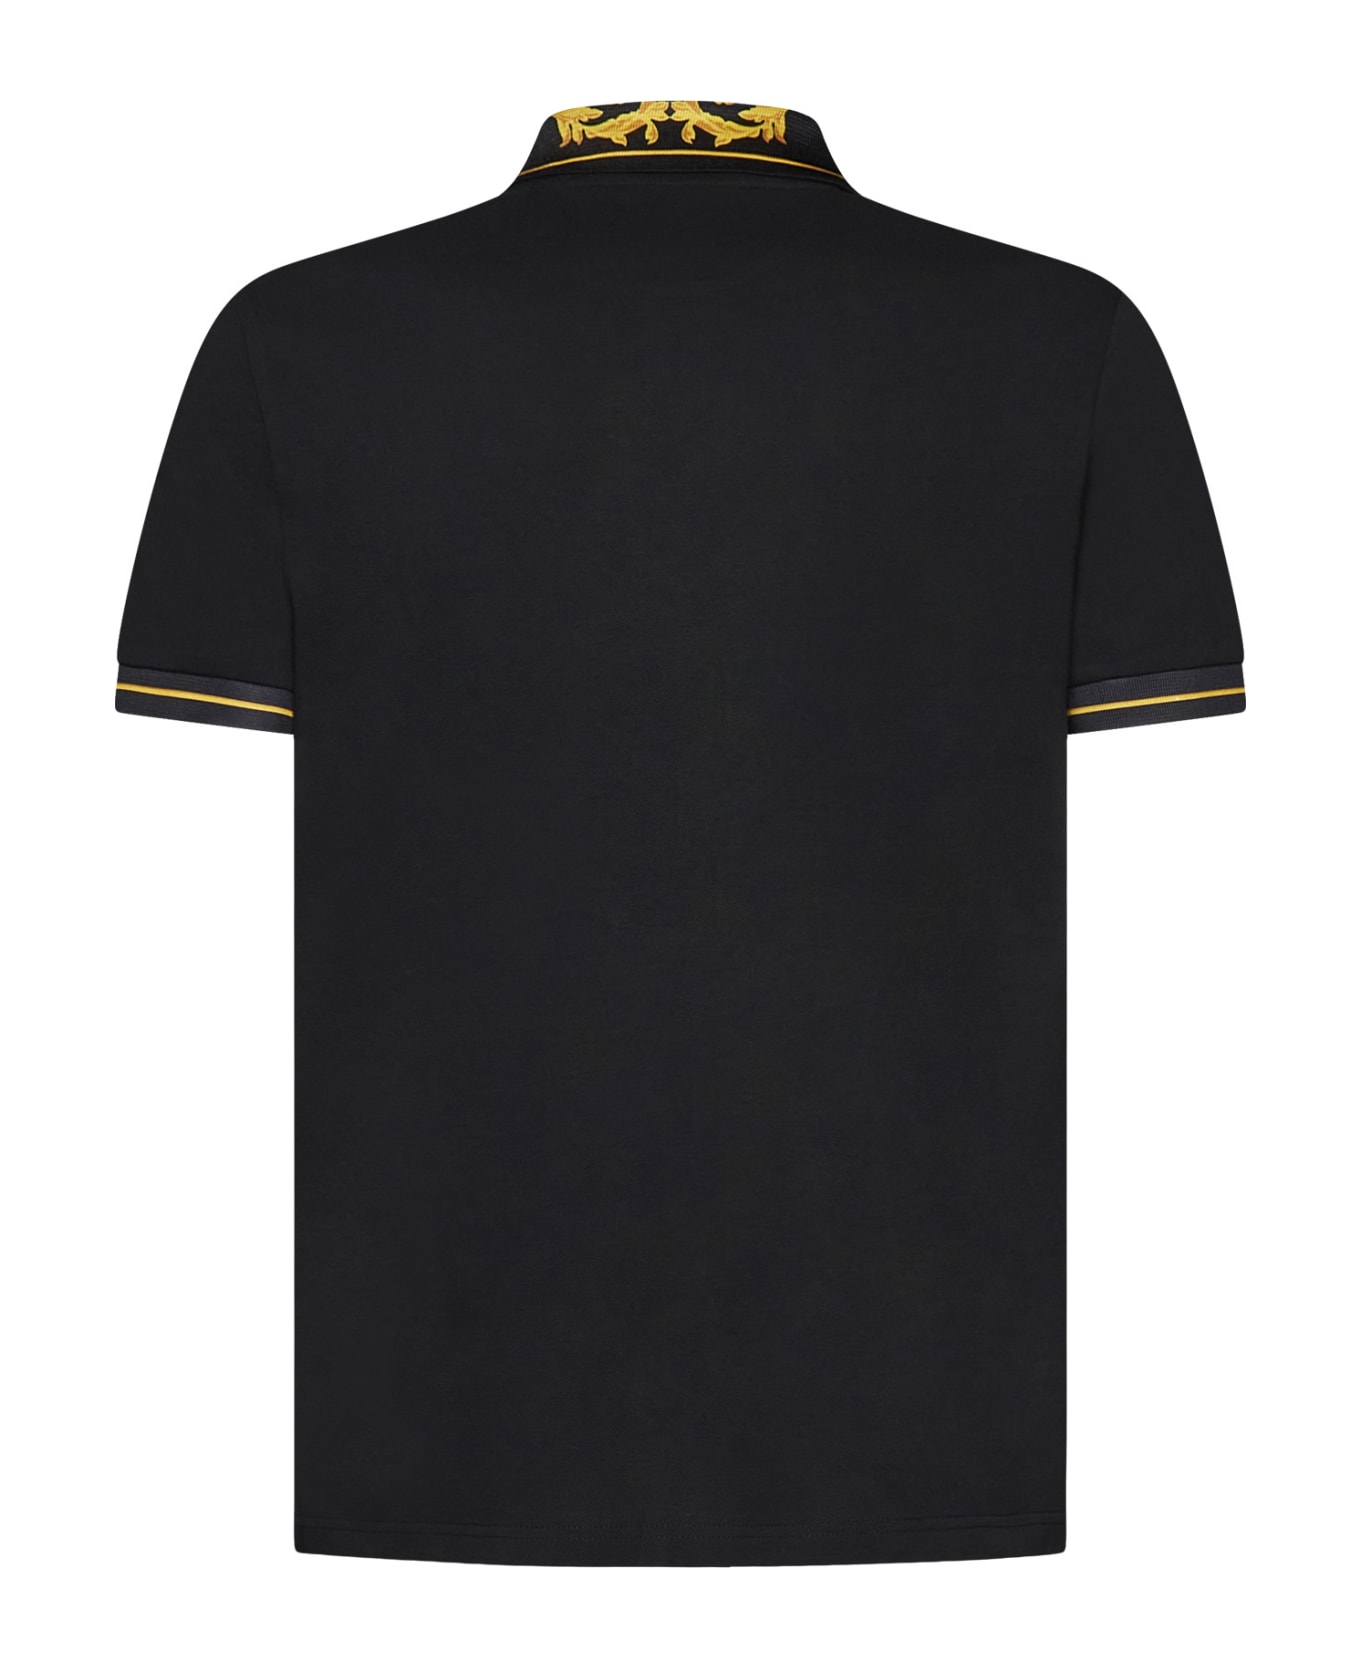 Versace Jeans Couture Baroque-pattern Polo Shirt - black ポロシャツ